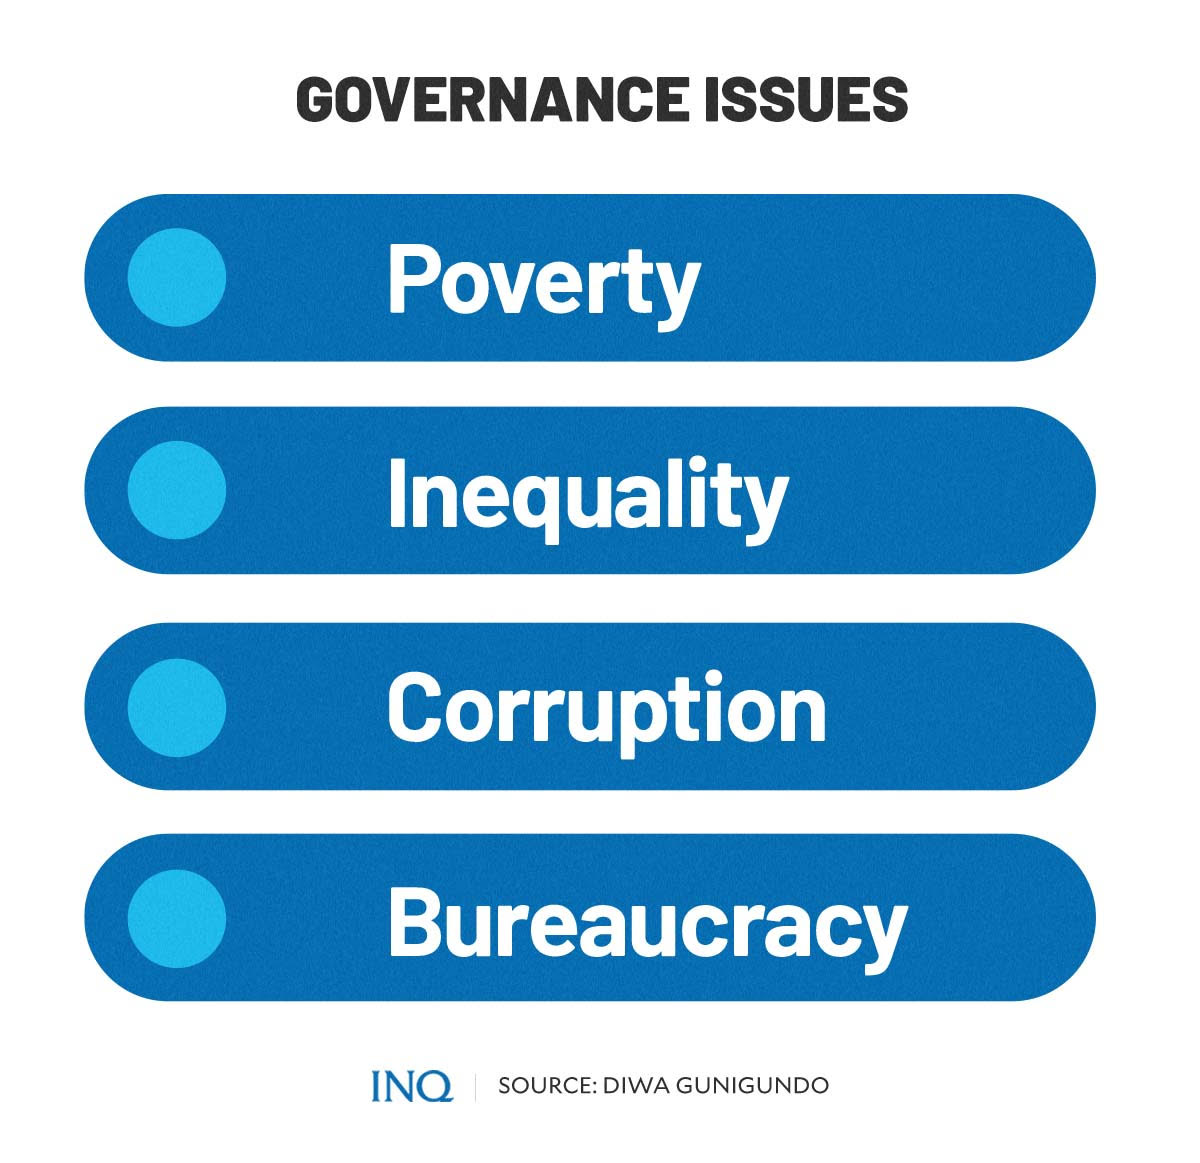 Governance issues